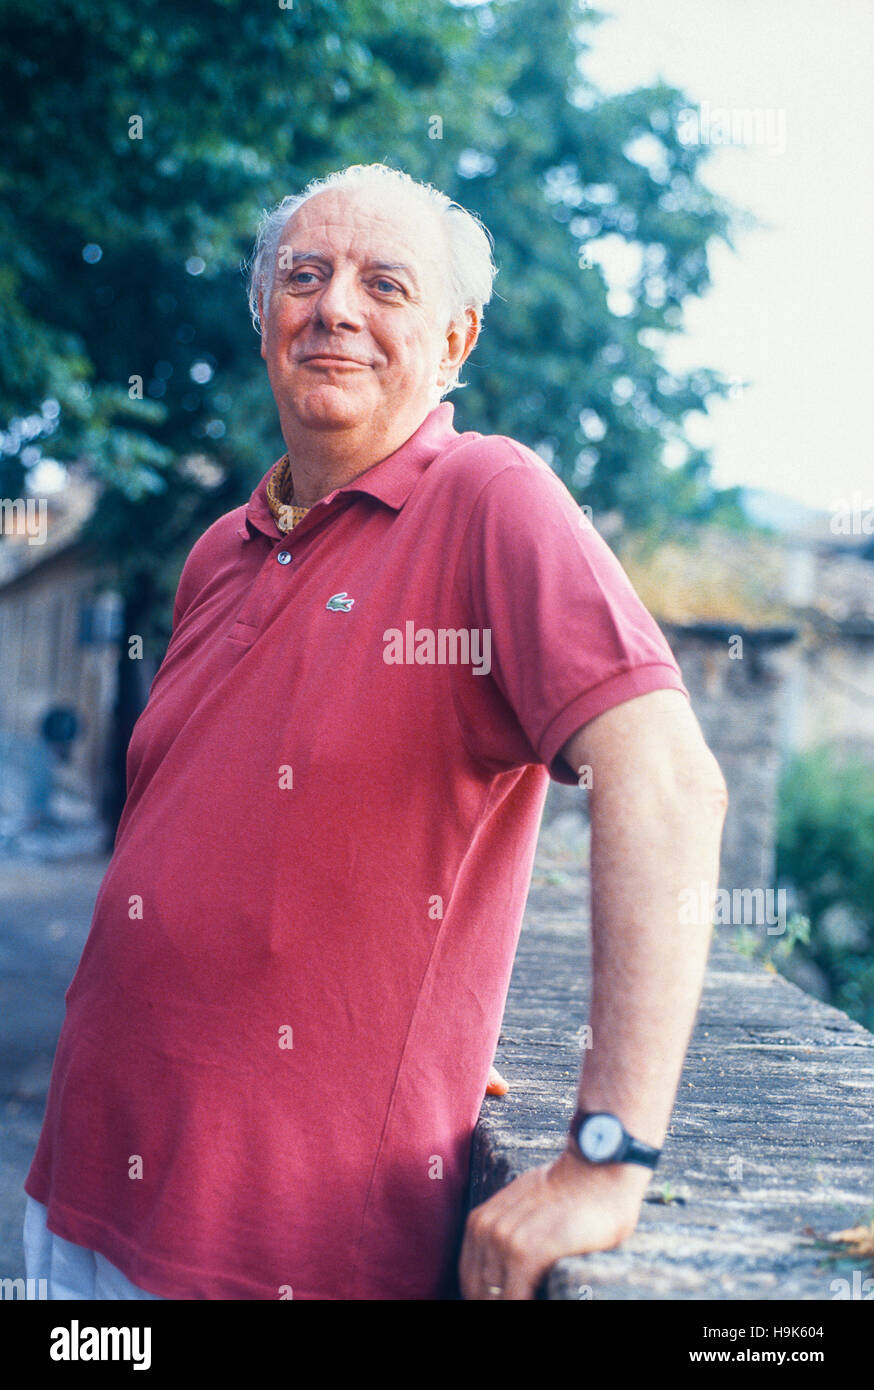 Dario Fo was a playwright, actor, director, writer, author, illustrator, painter, designer and Italian activist (March 24, 1926, Sangiano -October 13, 2016, Luigi Sacco Hospital, Milan ) -Nobel Prize winner for literature in 1997 Stock Photo